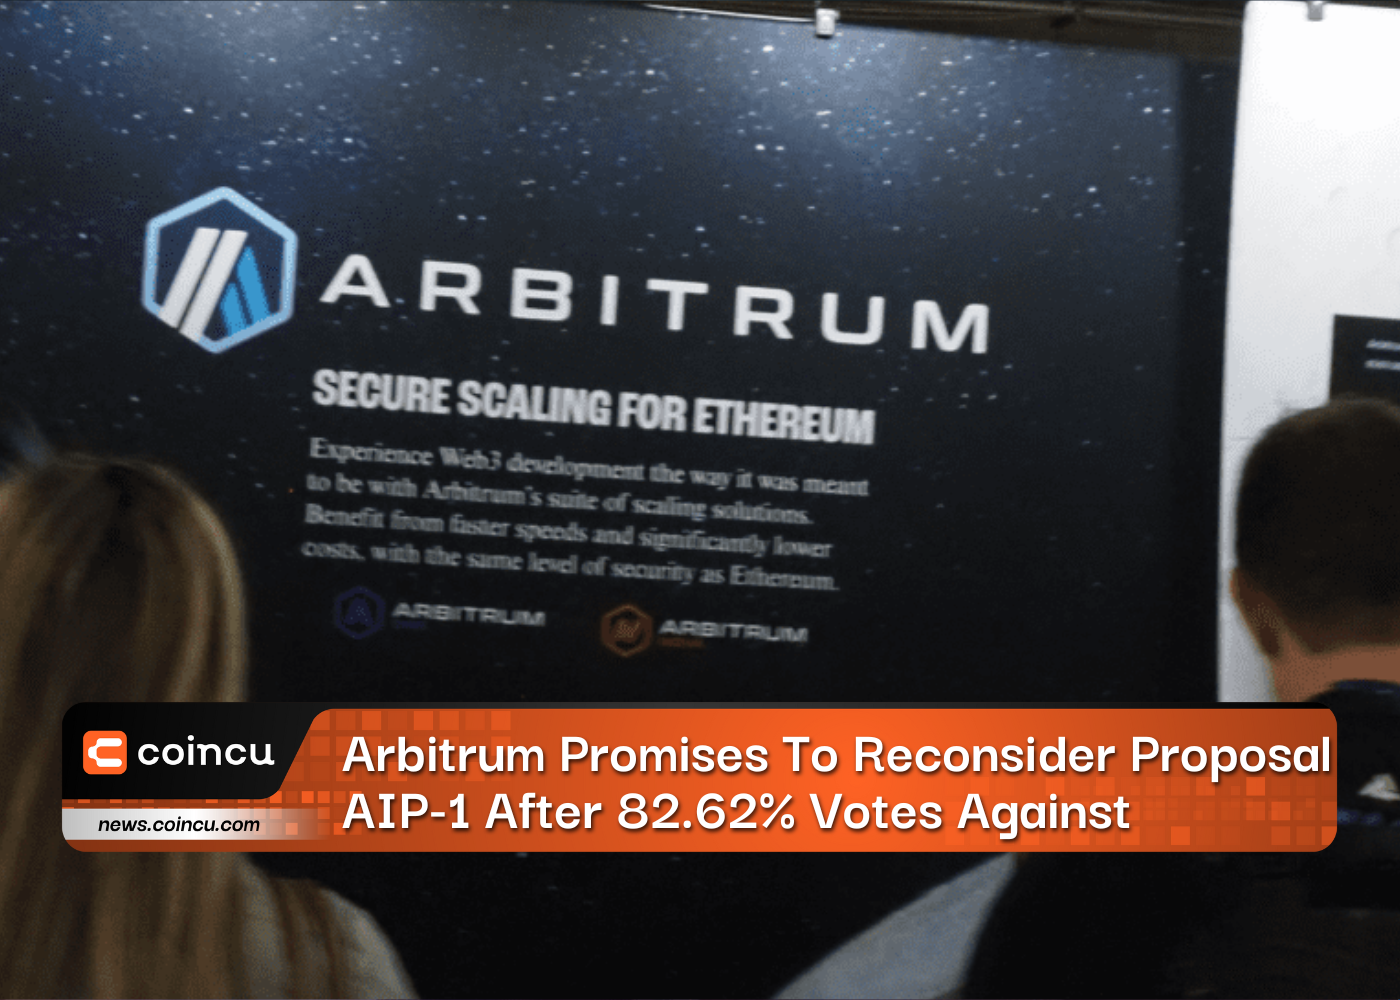 Arbitrum Promises To Reconsider Proposal AIP-1 After 82.62% Votes Against